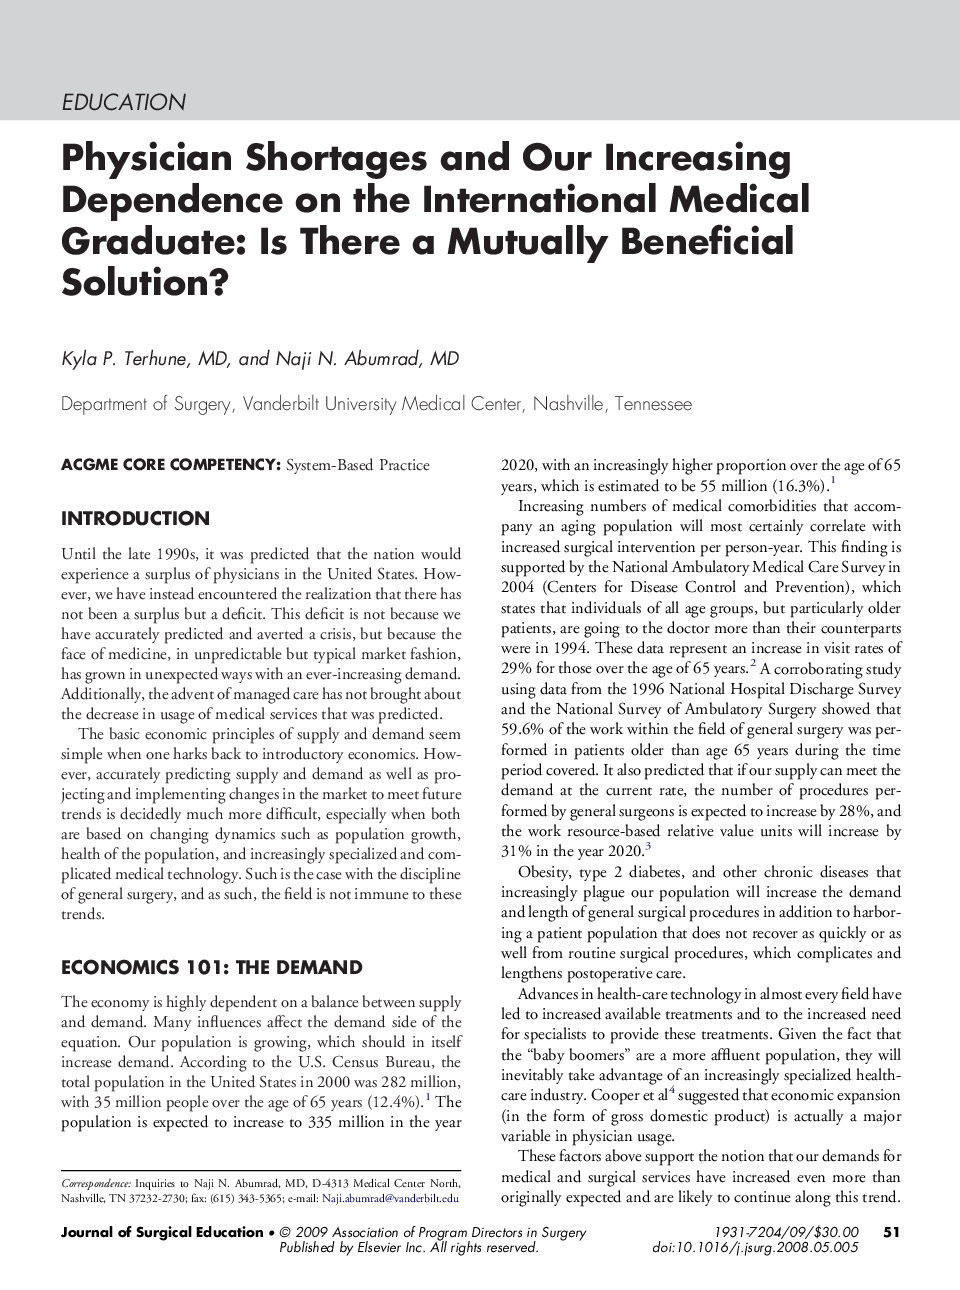 Physician Shortages and Our Increasing Dependence on the International Medical Graduate: Is There a Mutually Beneficial Solution?